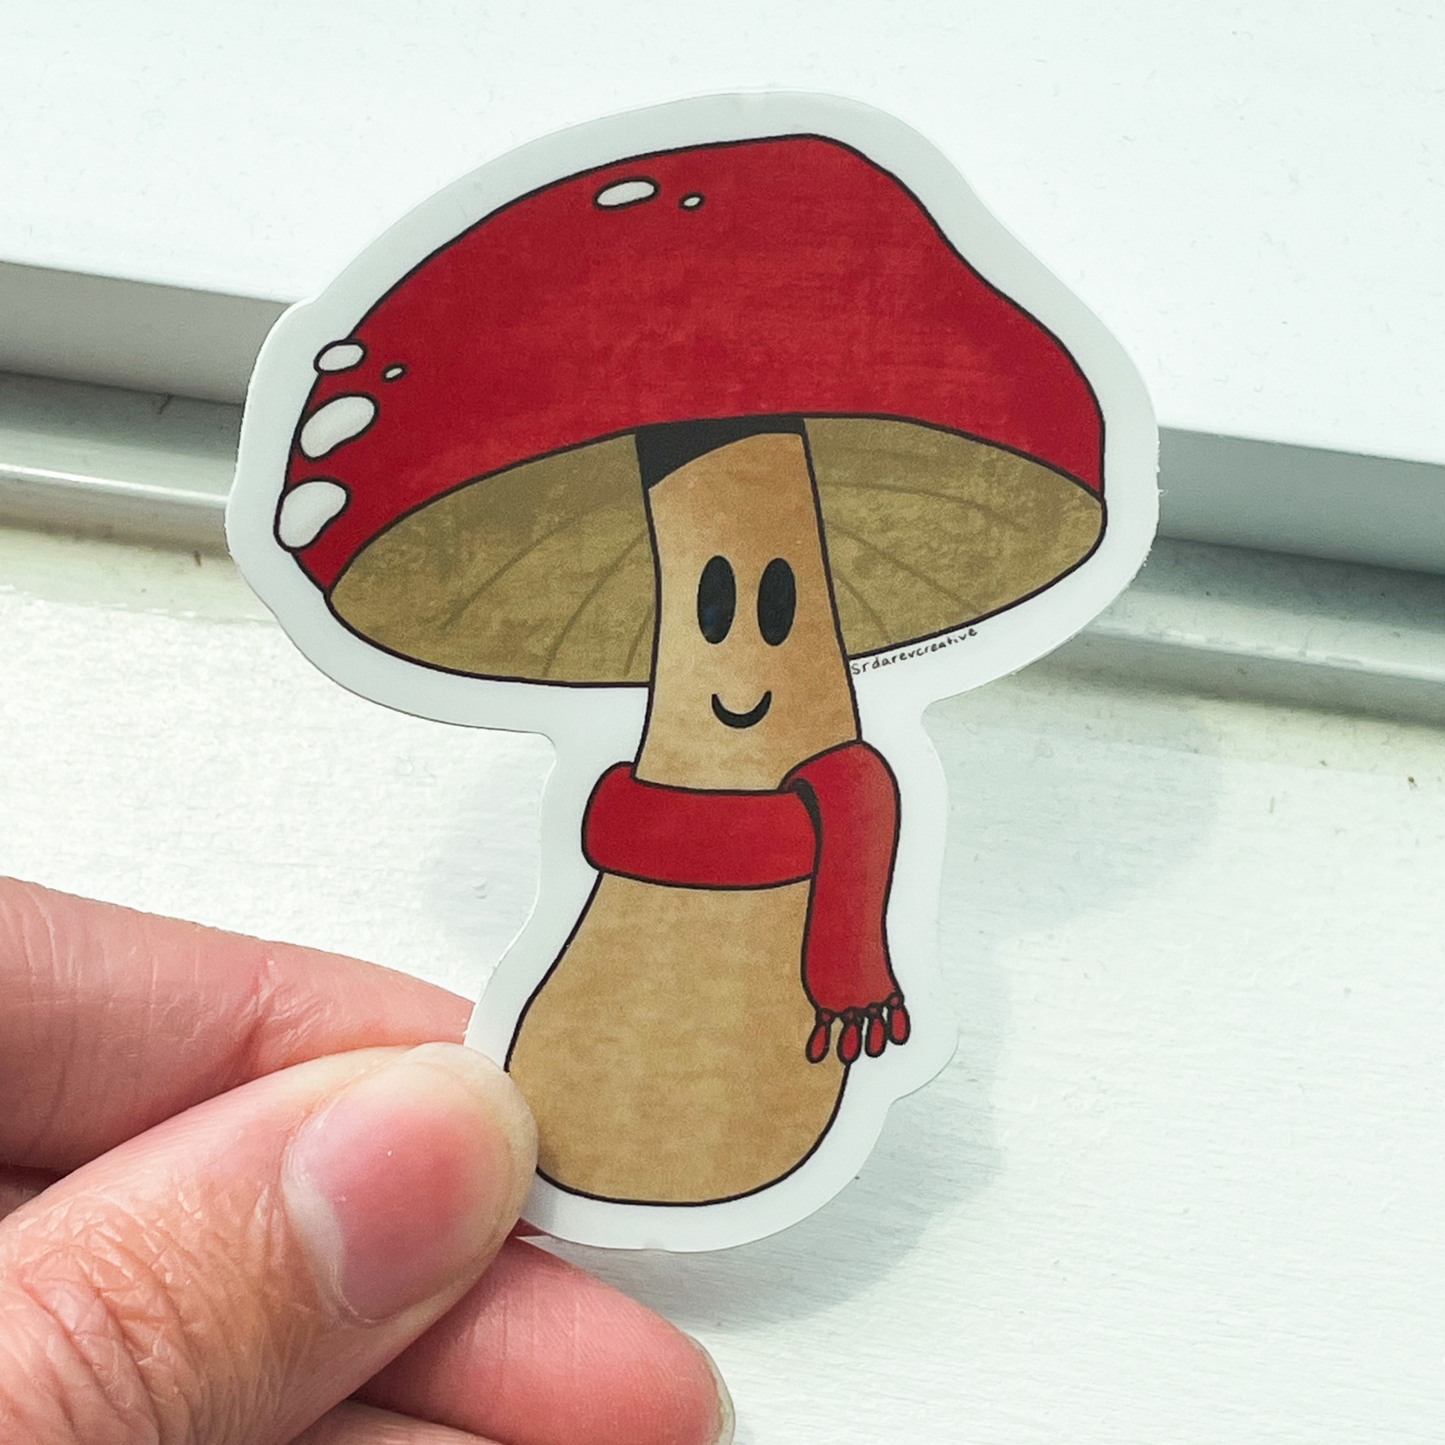 A white window sill background. In the front is a hand holding a mushroom sticker that has a red cap and matching red scarf with a smile on its face.